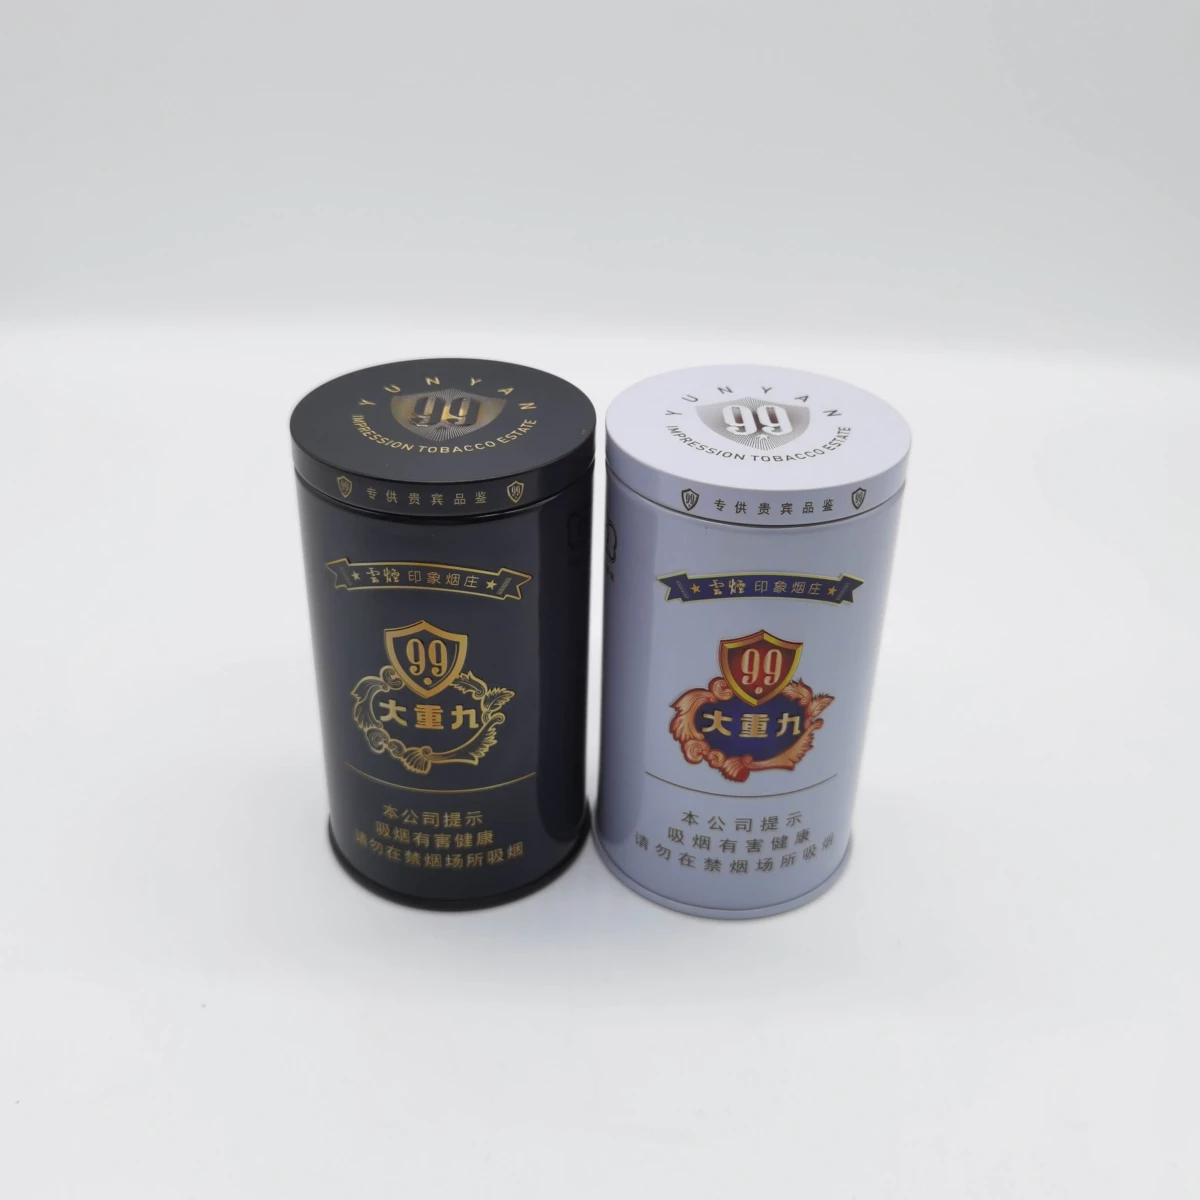 China RB002 Round cigarette tin can Manufacturers, Factory - Buy RB002 Round cigarette tin can at Good Price - Haohang